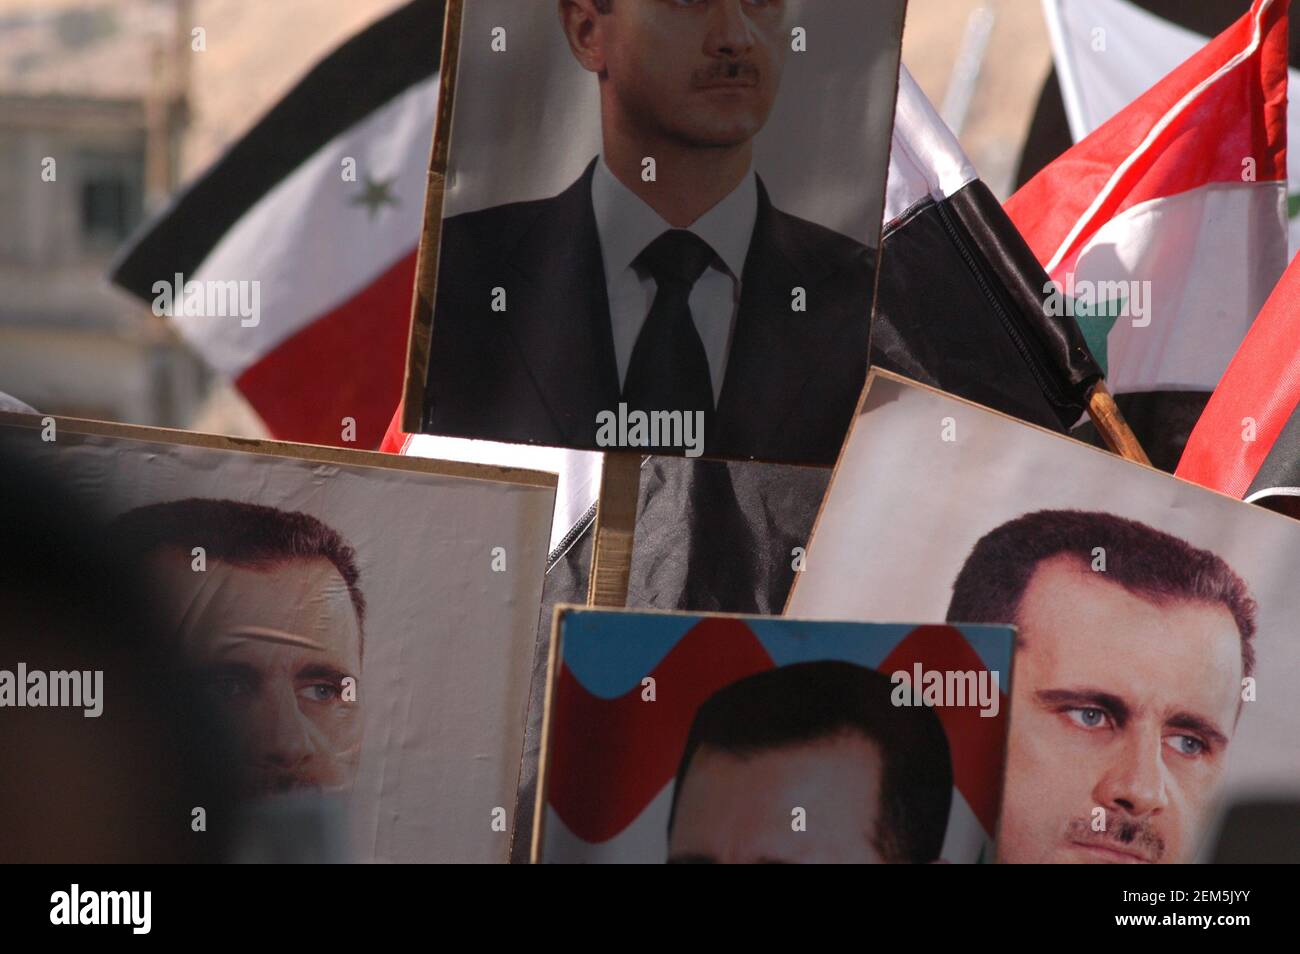 Damascus, Syria. 24th October 2005  Posters of the Syrian President at a pro-government demonstration in Damascus, Syria. Stock Photo